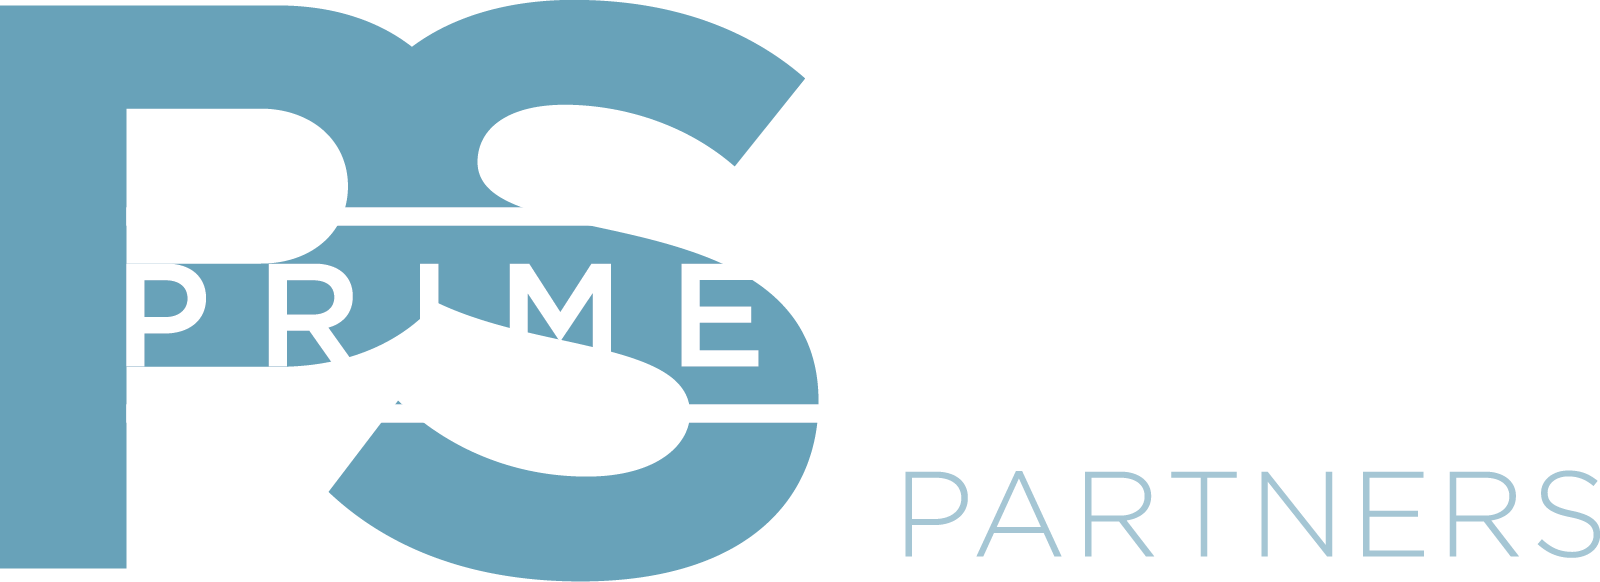 Prime South Partners